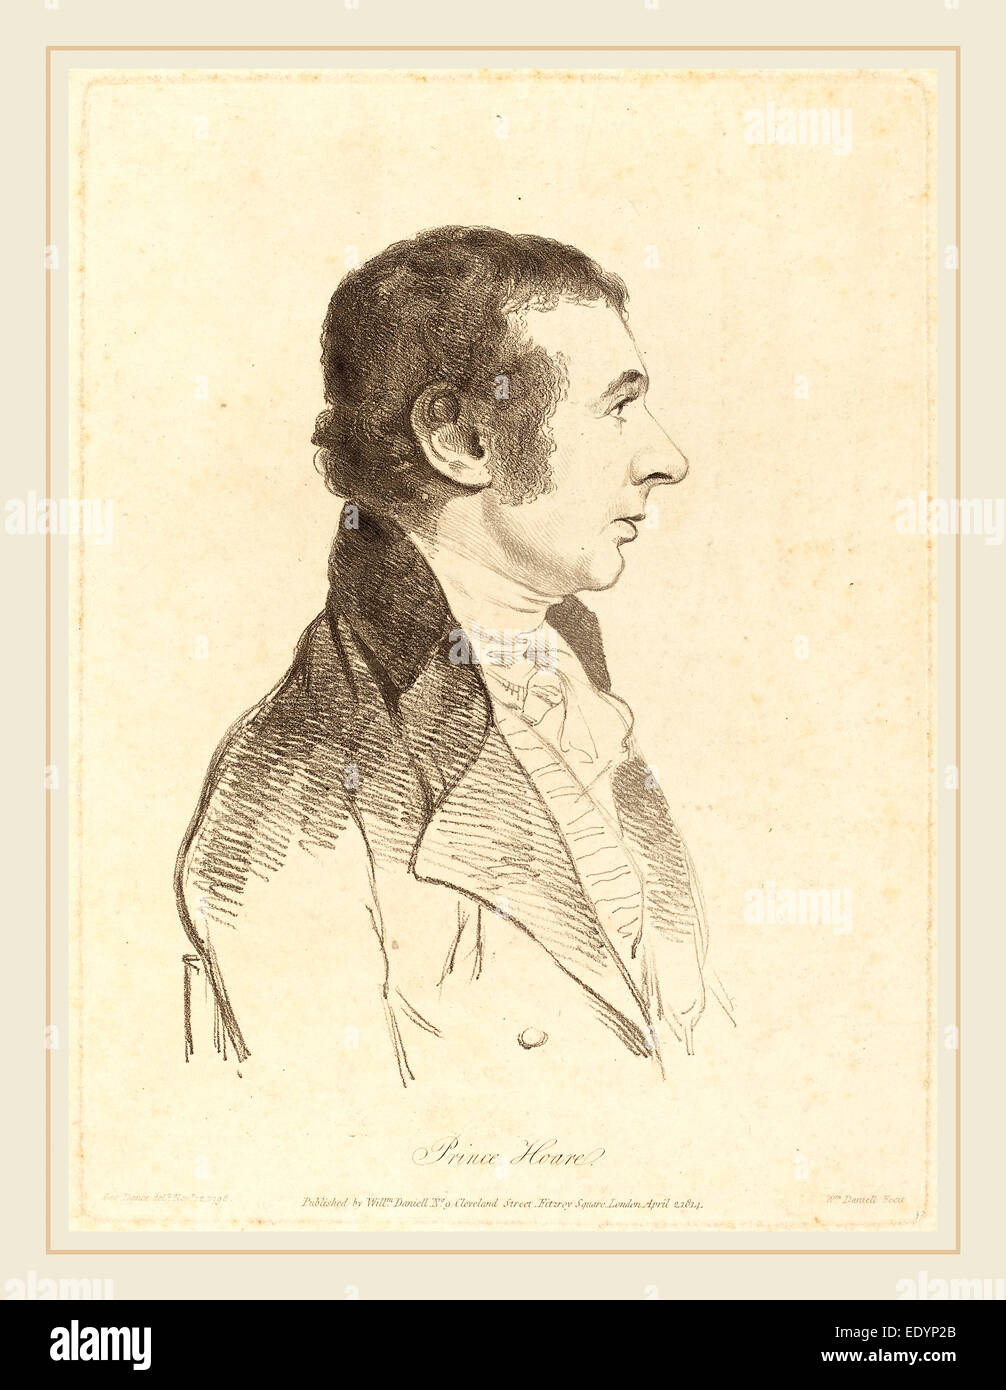 William Daniell après George Dance II (1769-1837), Prince (Hoare, lithographie, 1814 Banque D'Images